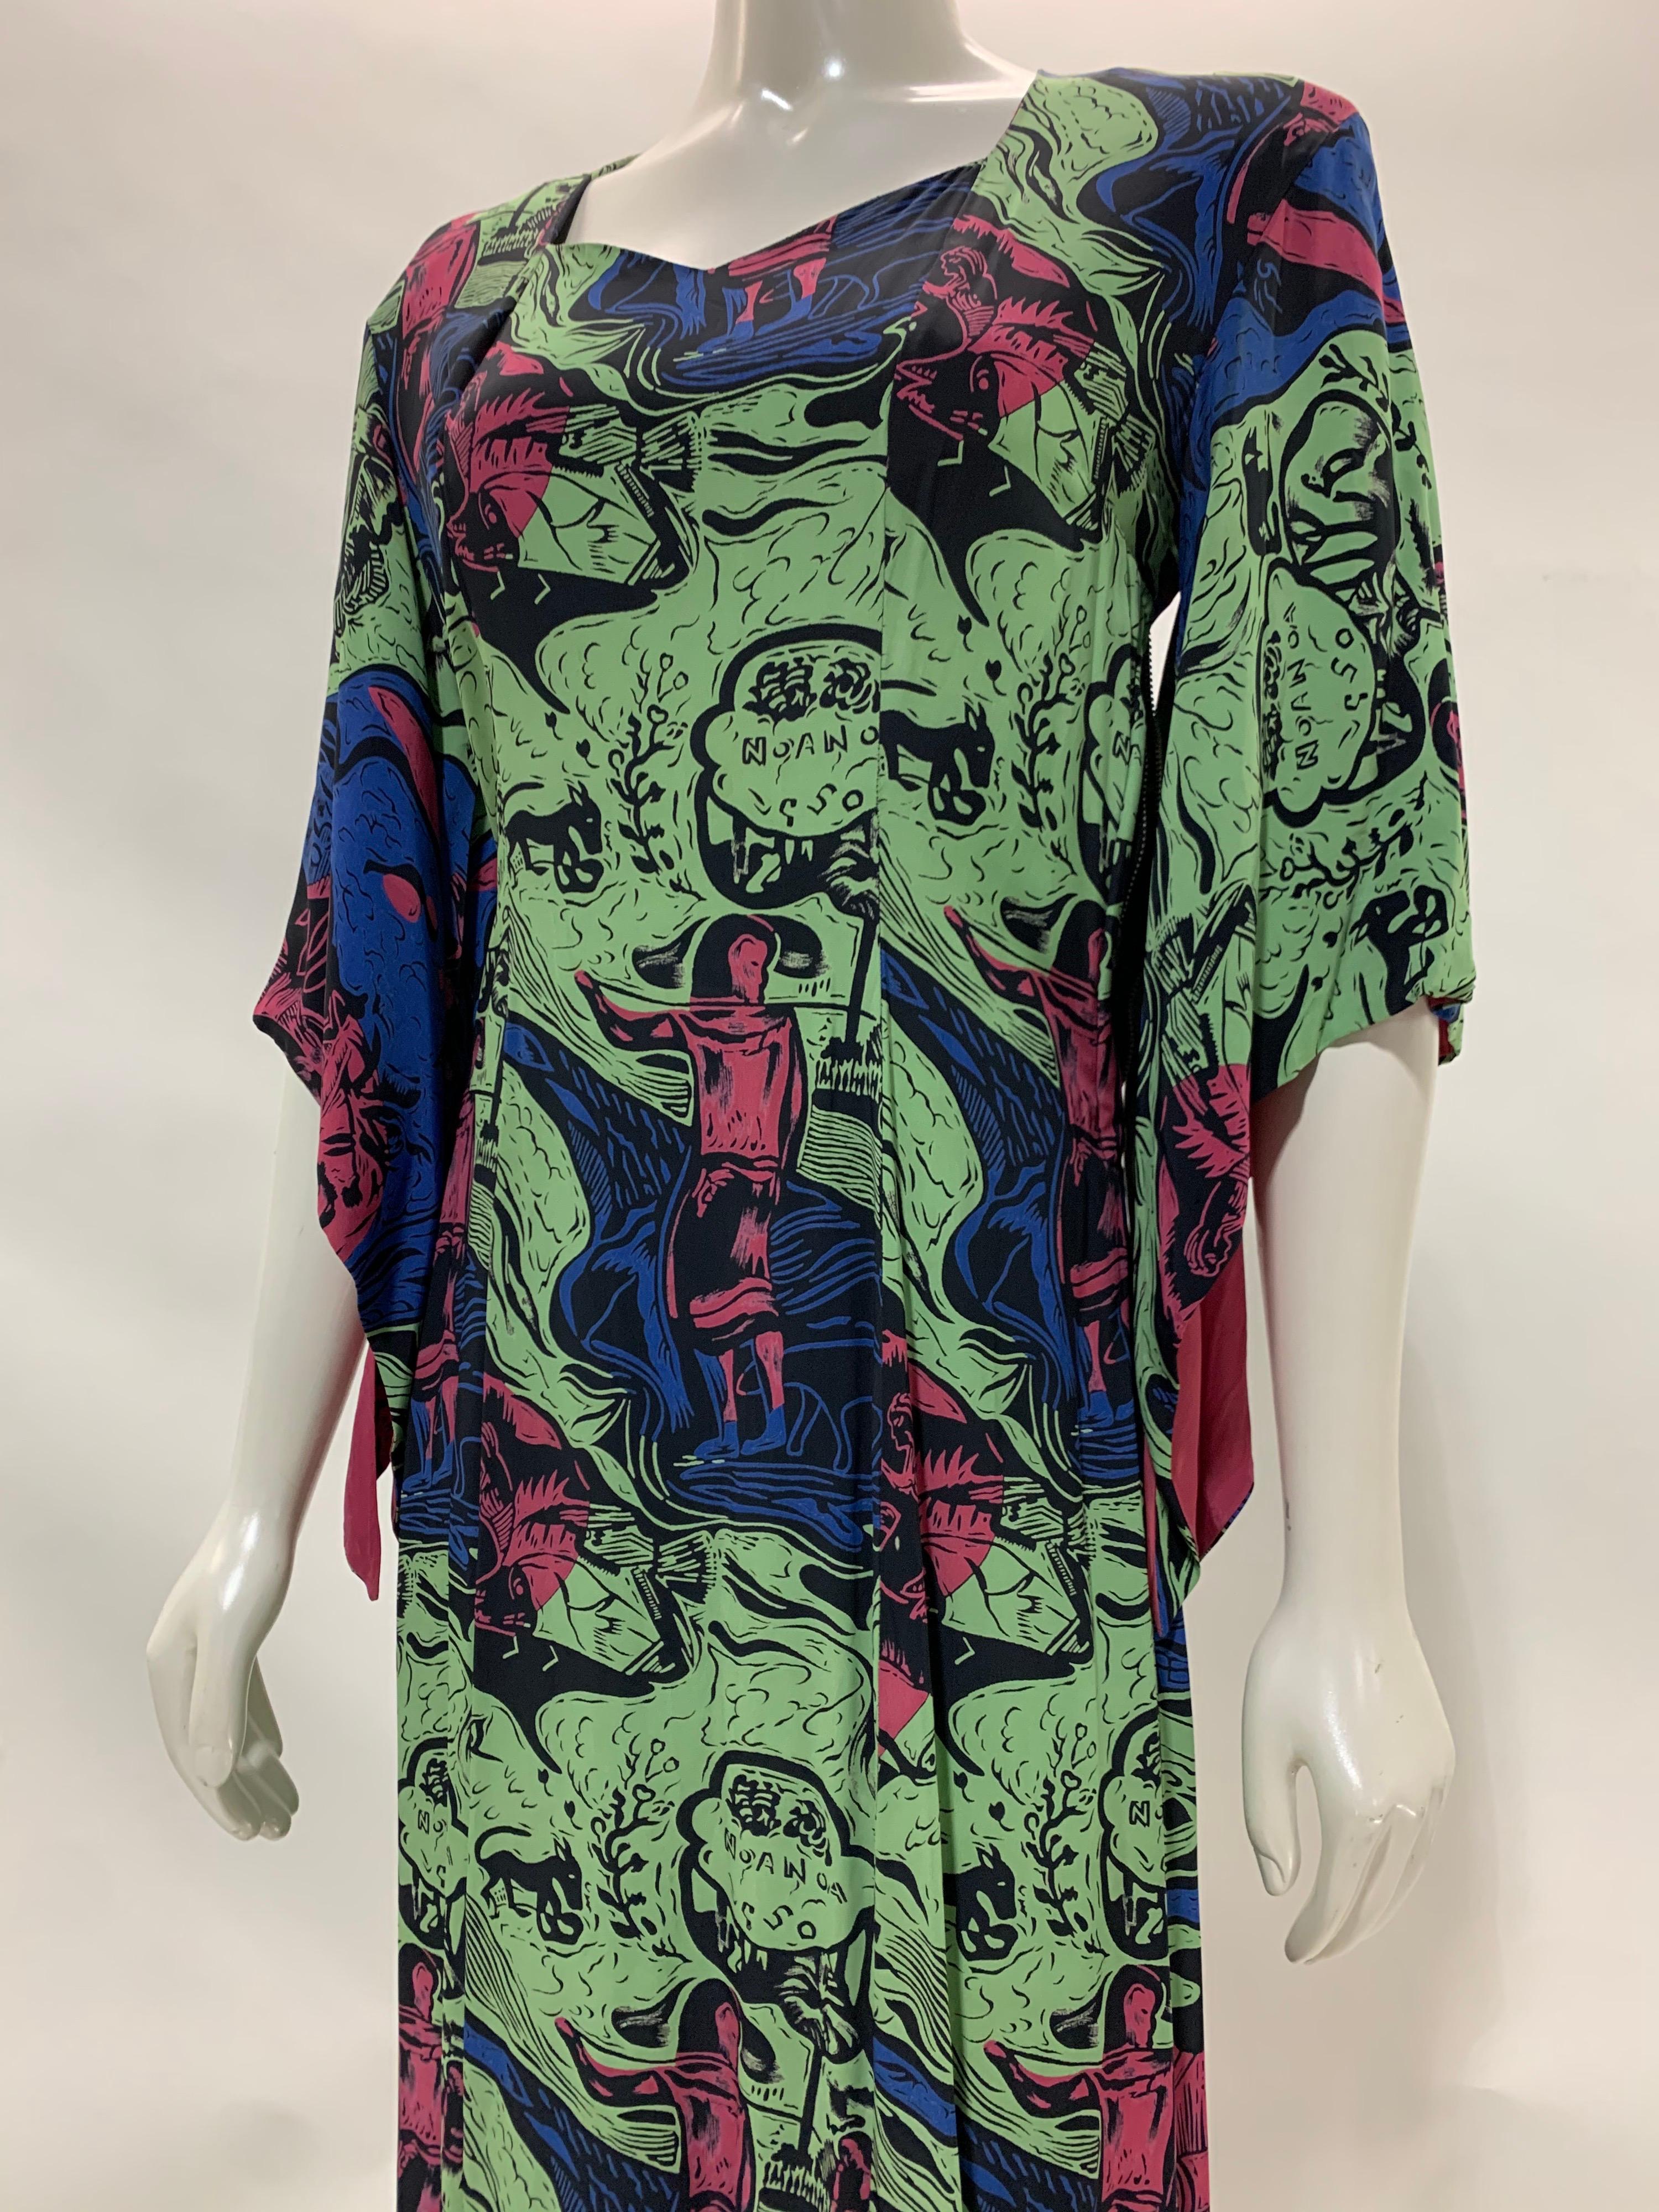 A fabulous and rare 1940s Kamehameha Polynesian styled mid-century graphic figural print rayon dress or caftan in chartreuse, magenta, black and cobalt blue. Solid magenta lining on traditional bell-shaped sleeves. Size 4-6.